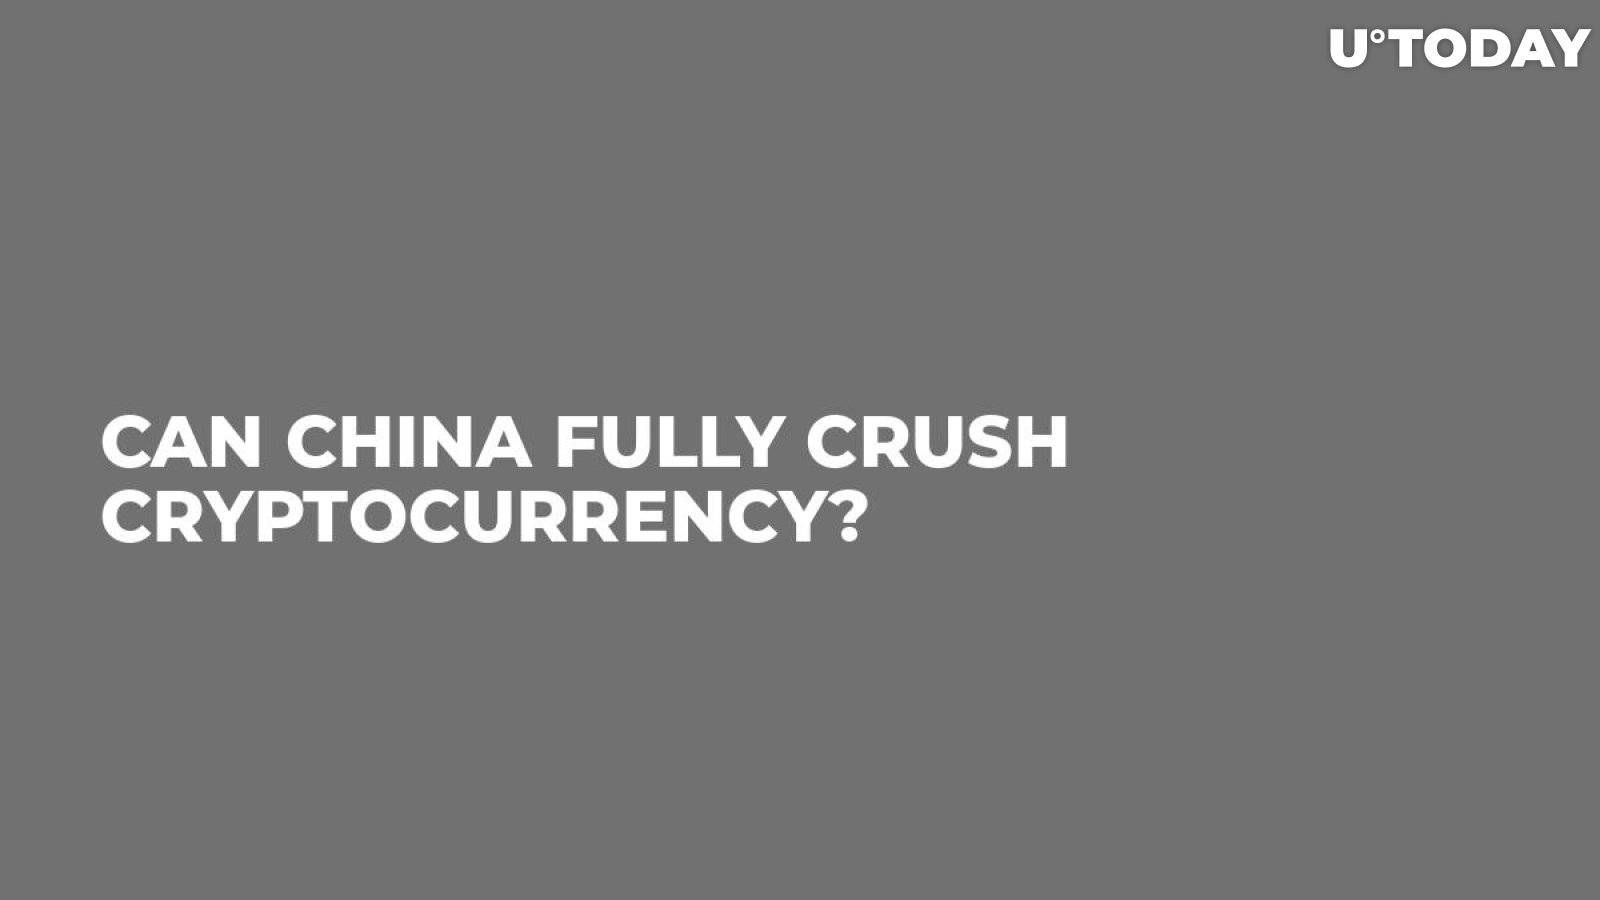 Can China Fully Crush Cryptocurrency?